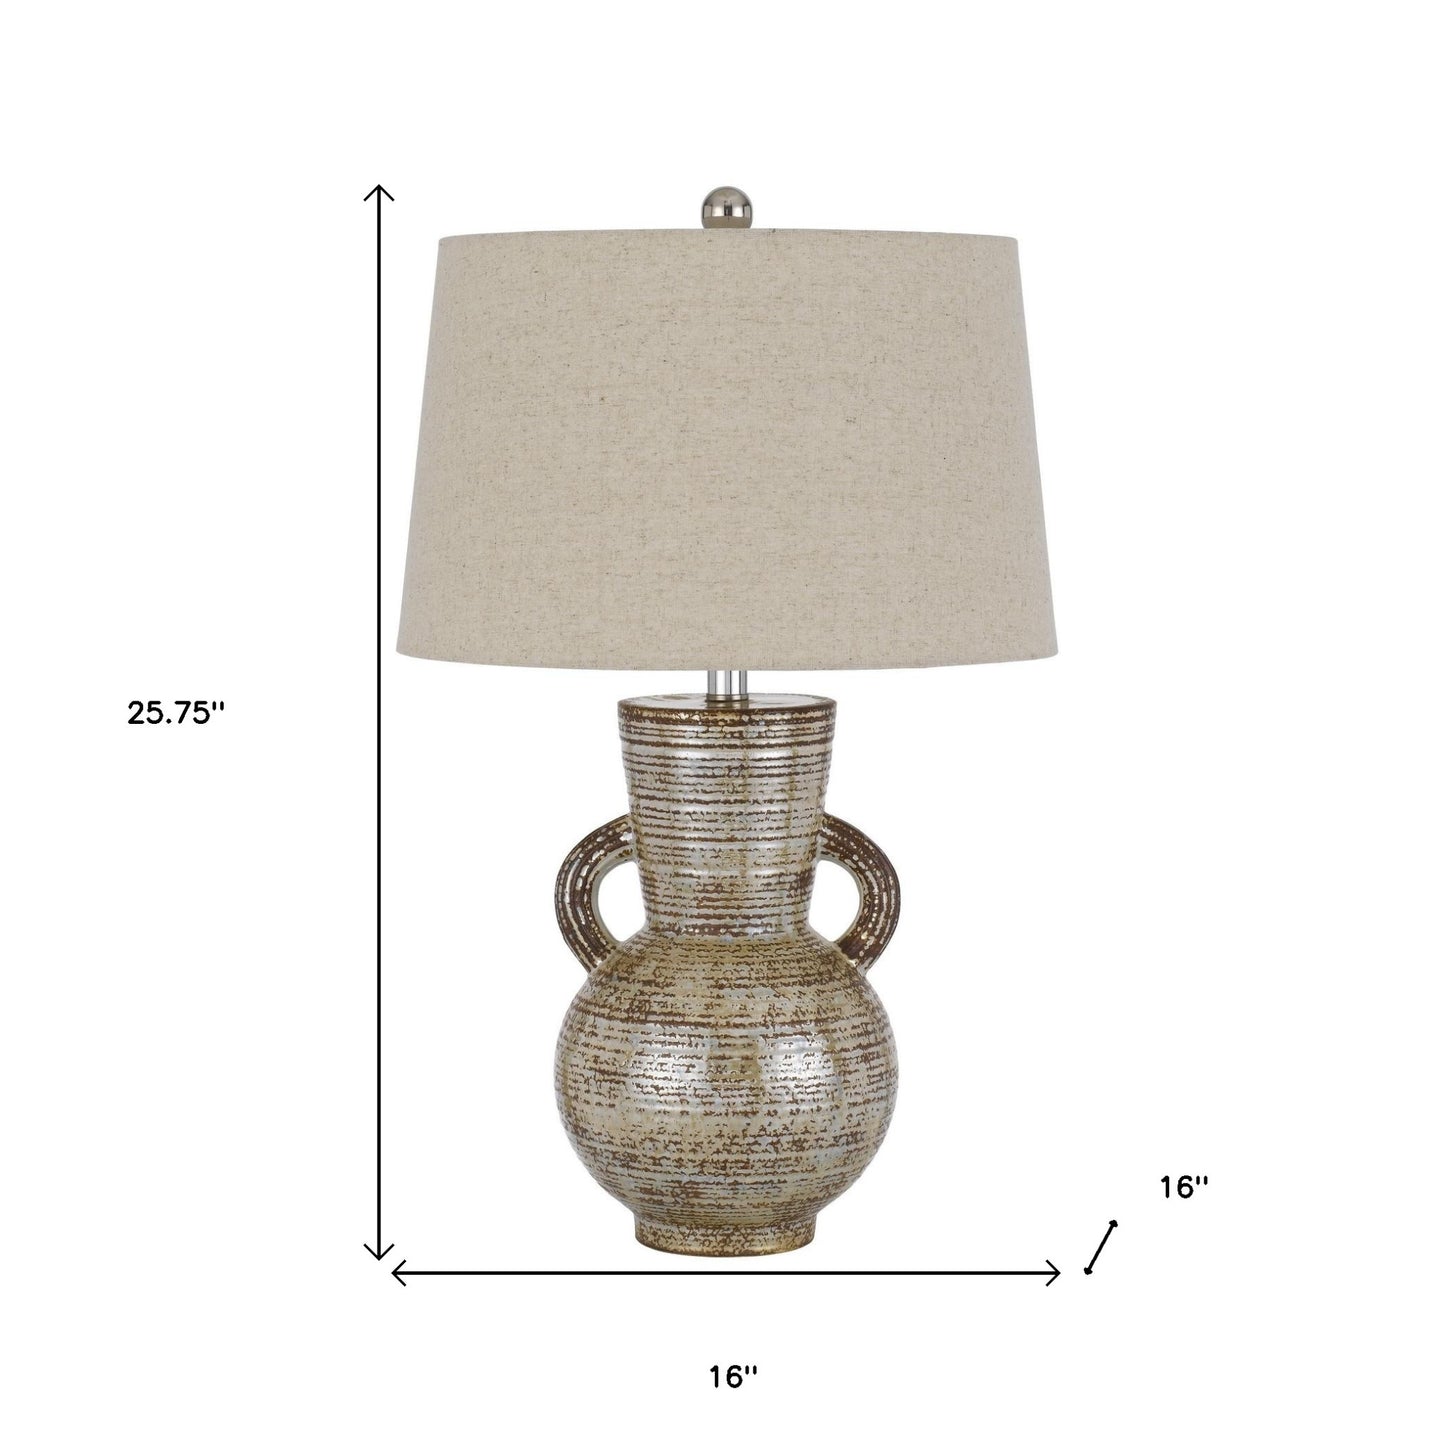 26" Bronze Ceramic Table Lamp With Brown Empire Shade